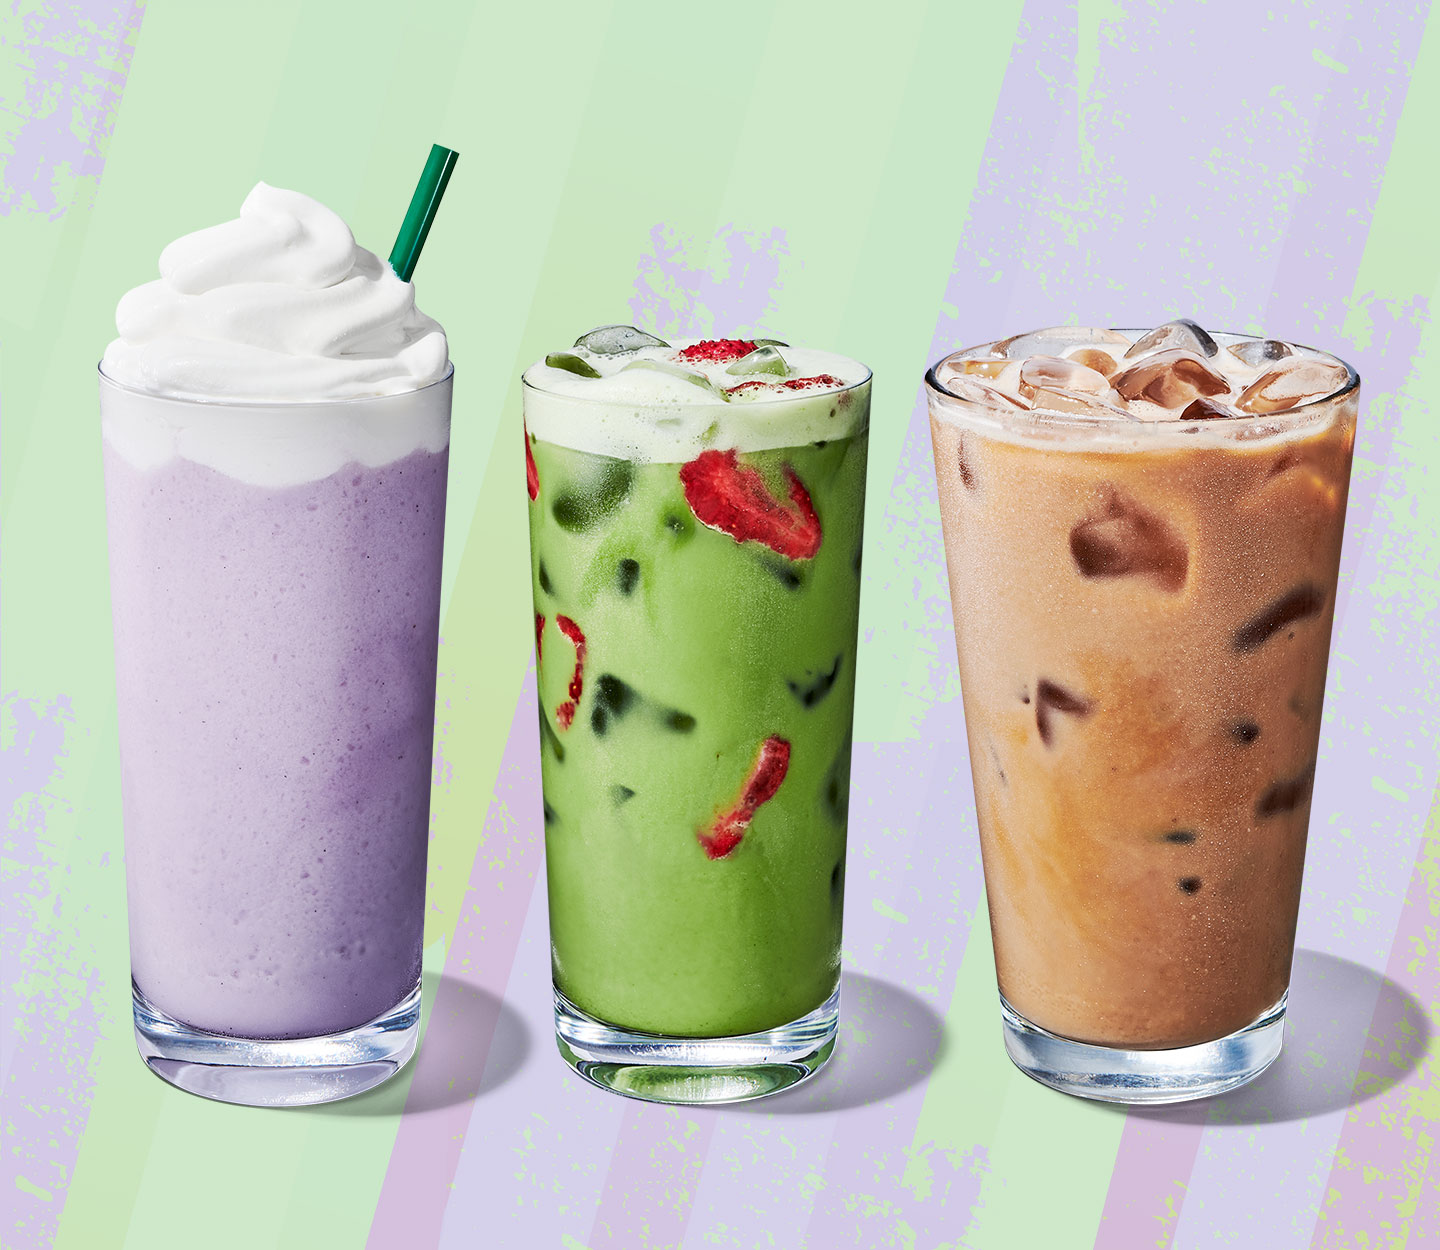 Lavender-hued blended drink, an iced green tea with strawberry inclusions and a creamy latte.